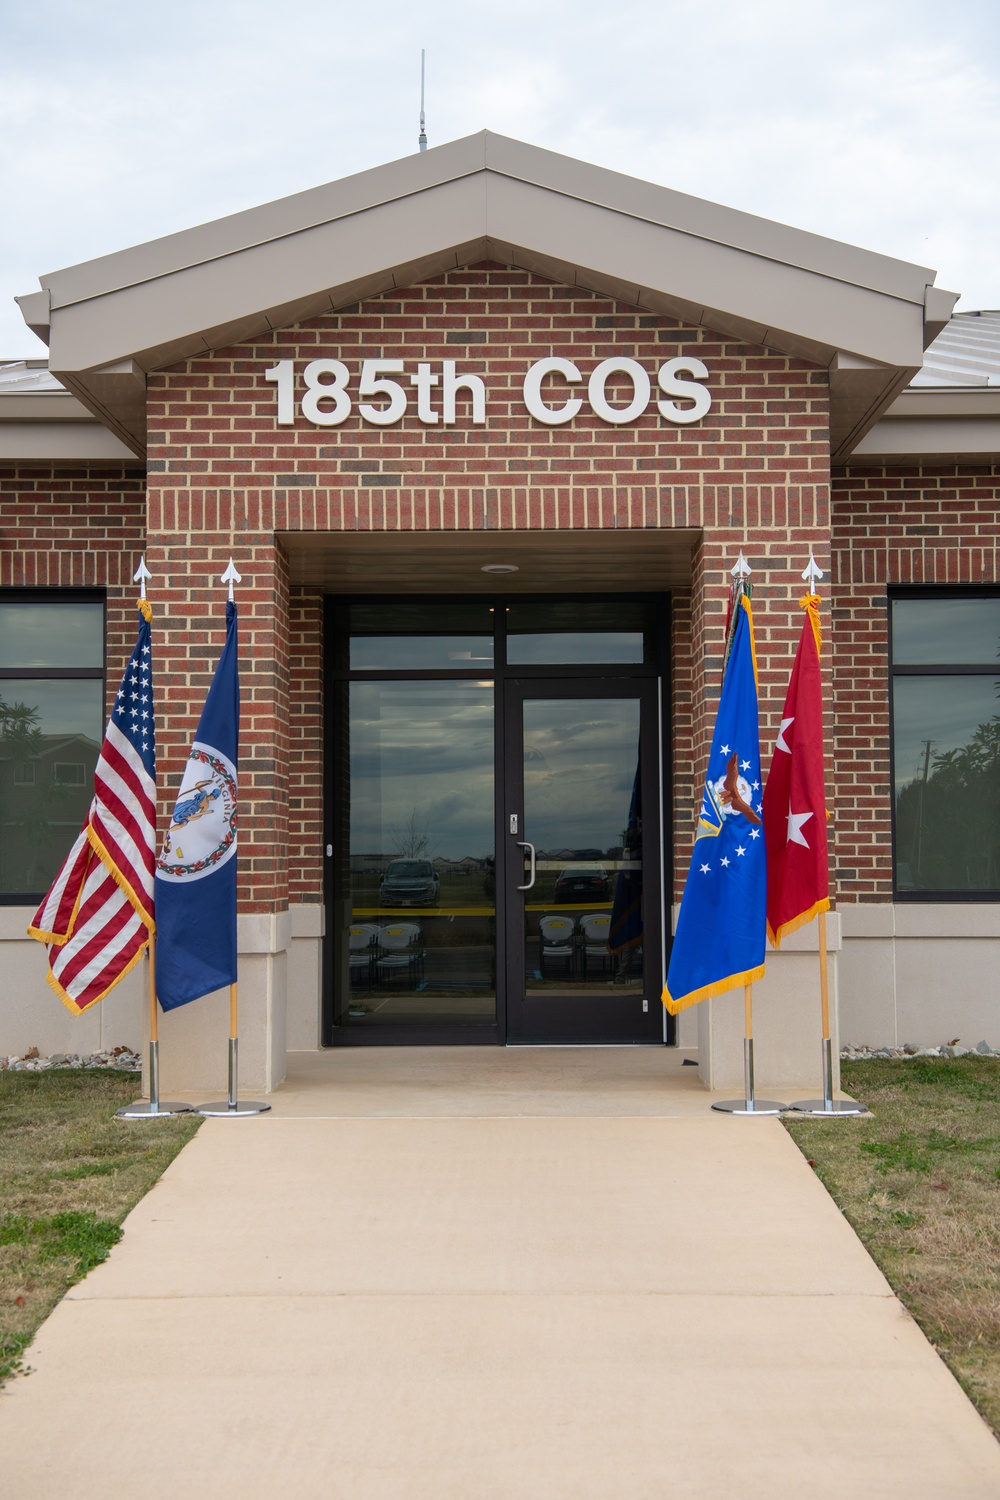 VaANG’s 185th Cyberspace Operations Squadron officially opens new headquarters